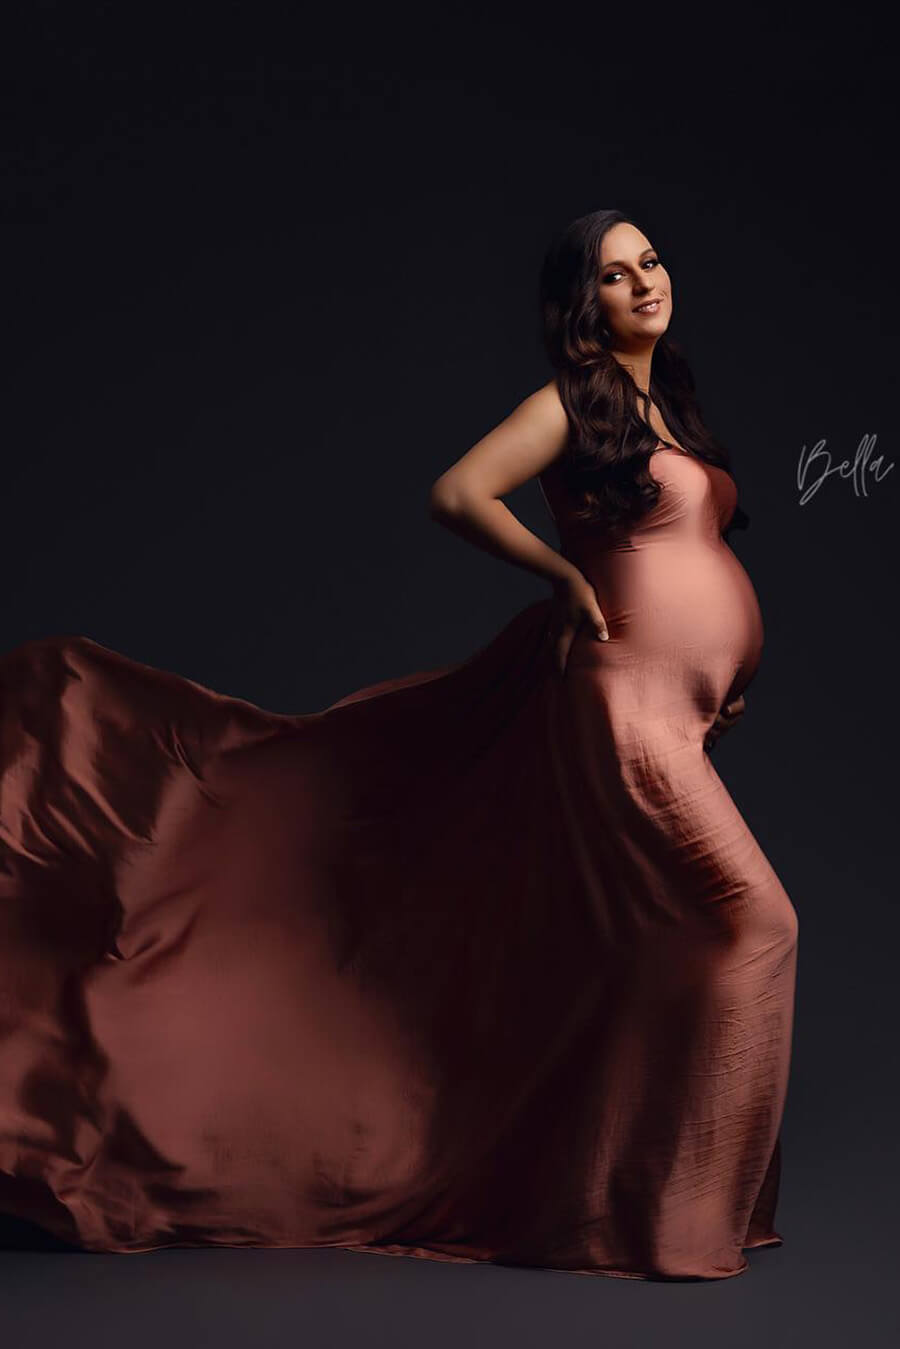 brunette pregnant model poses in a studio wearing a silky scarf wrapped around her body.